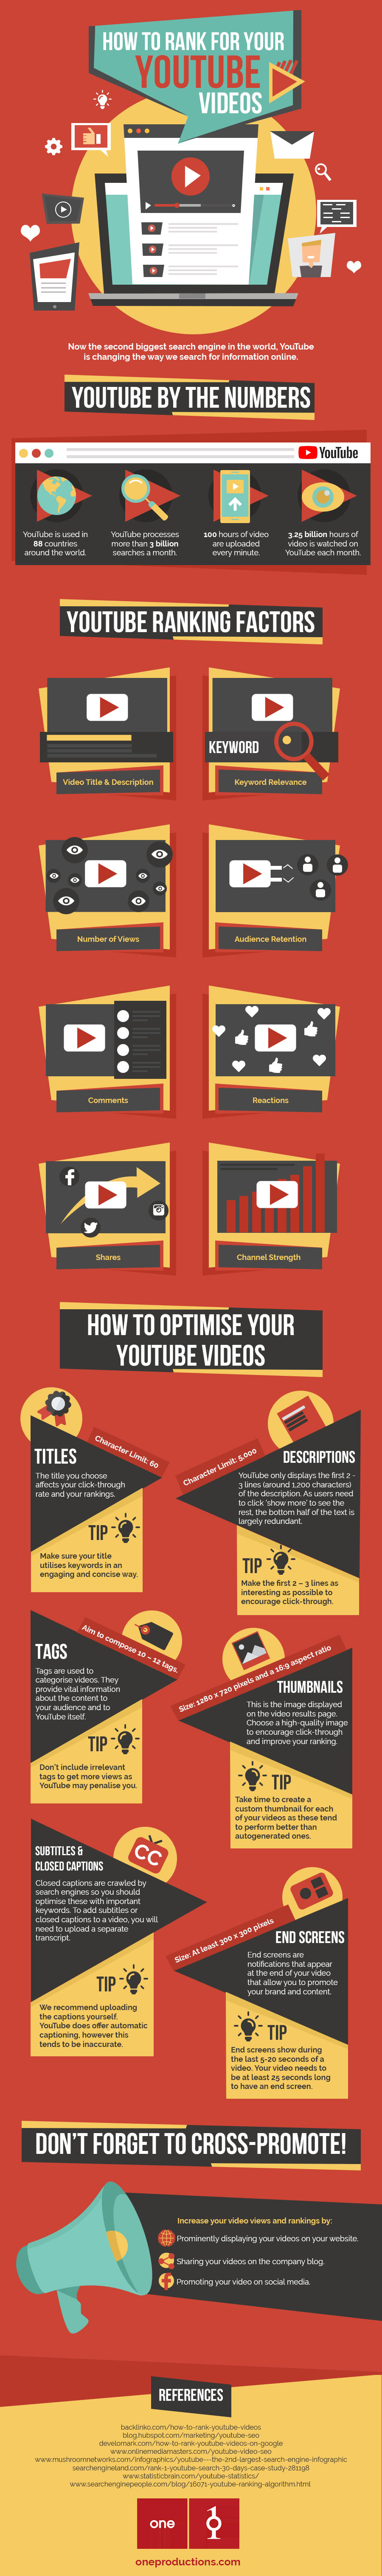 How to Get Your YouTube Videos to Rank in Search Results [Infographic]